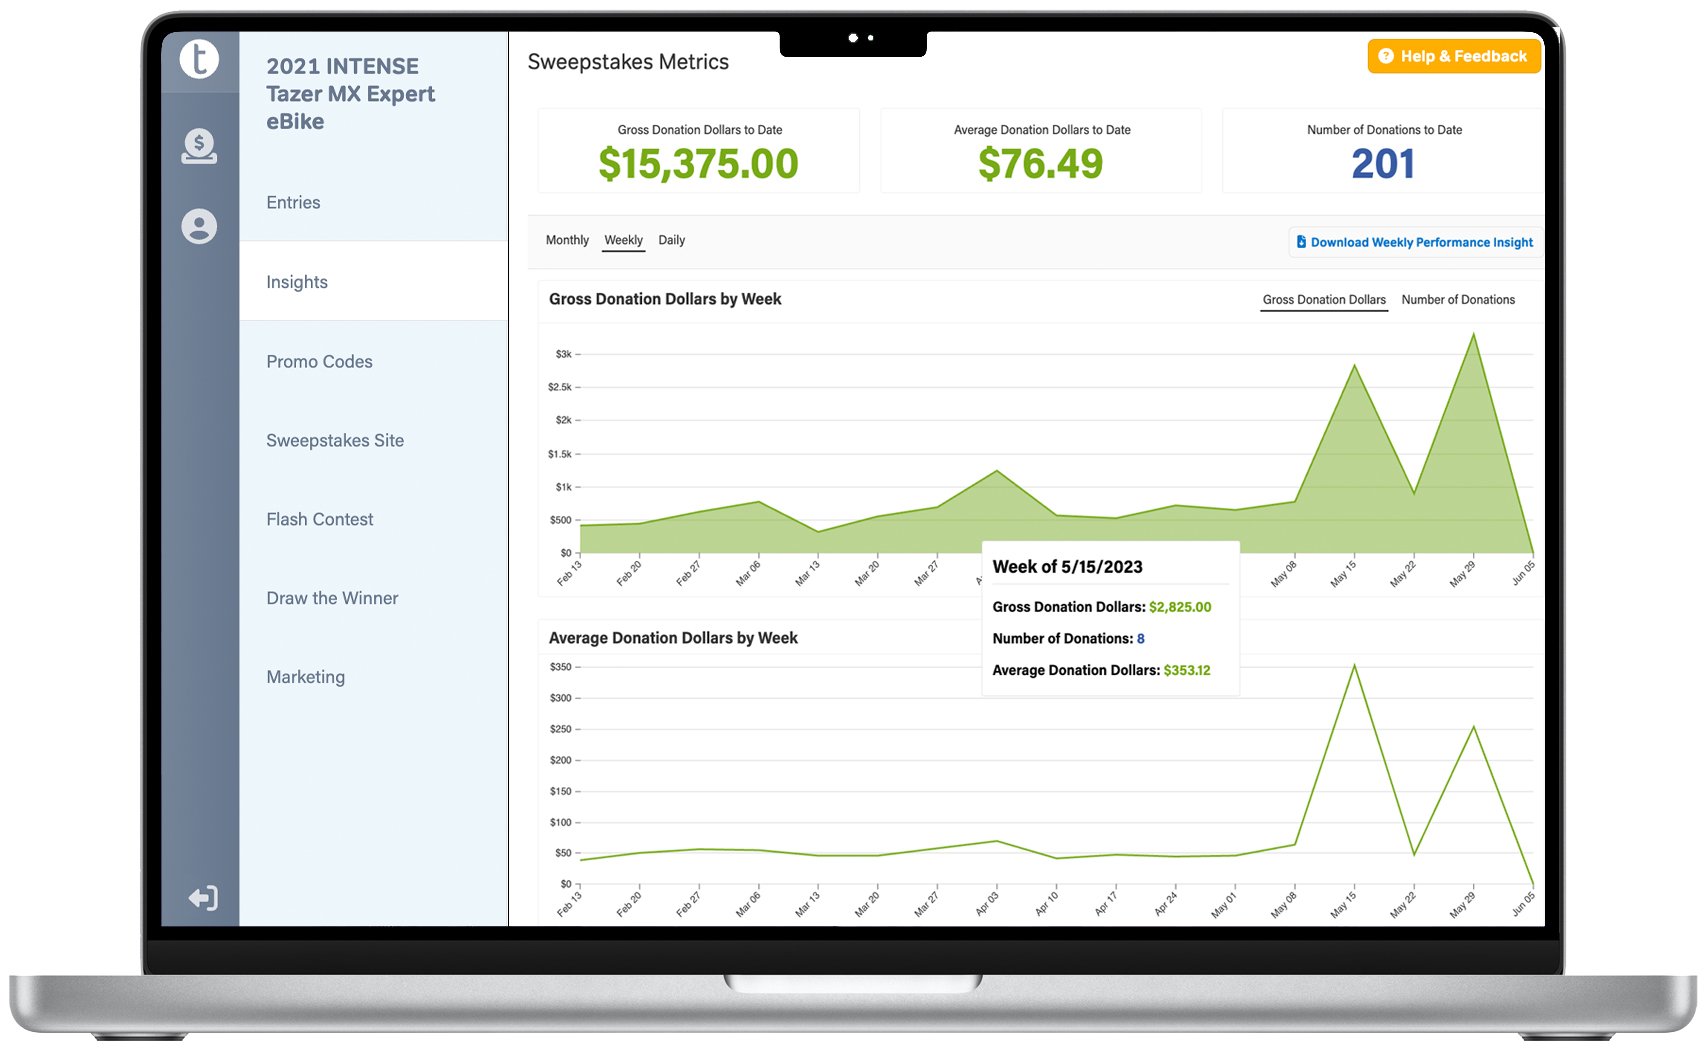 Track your progress with detailed insight metrics on your sweepstakes